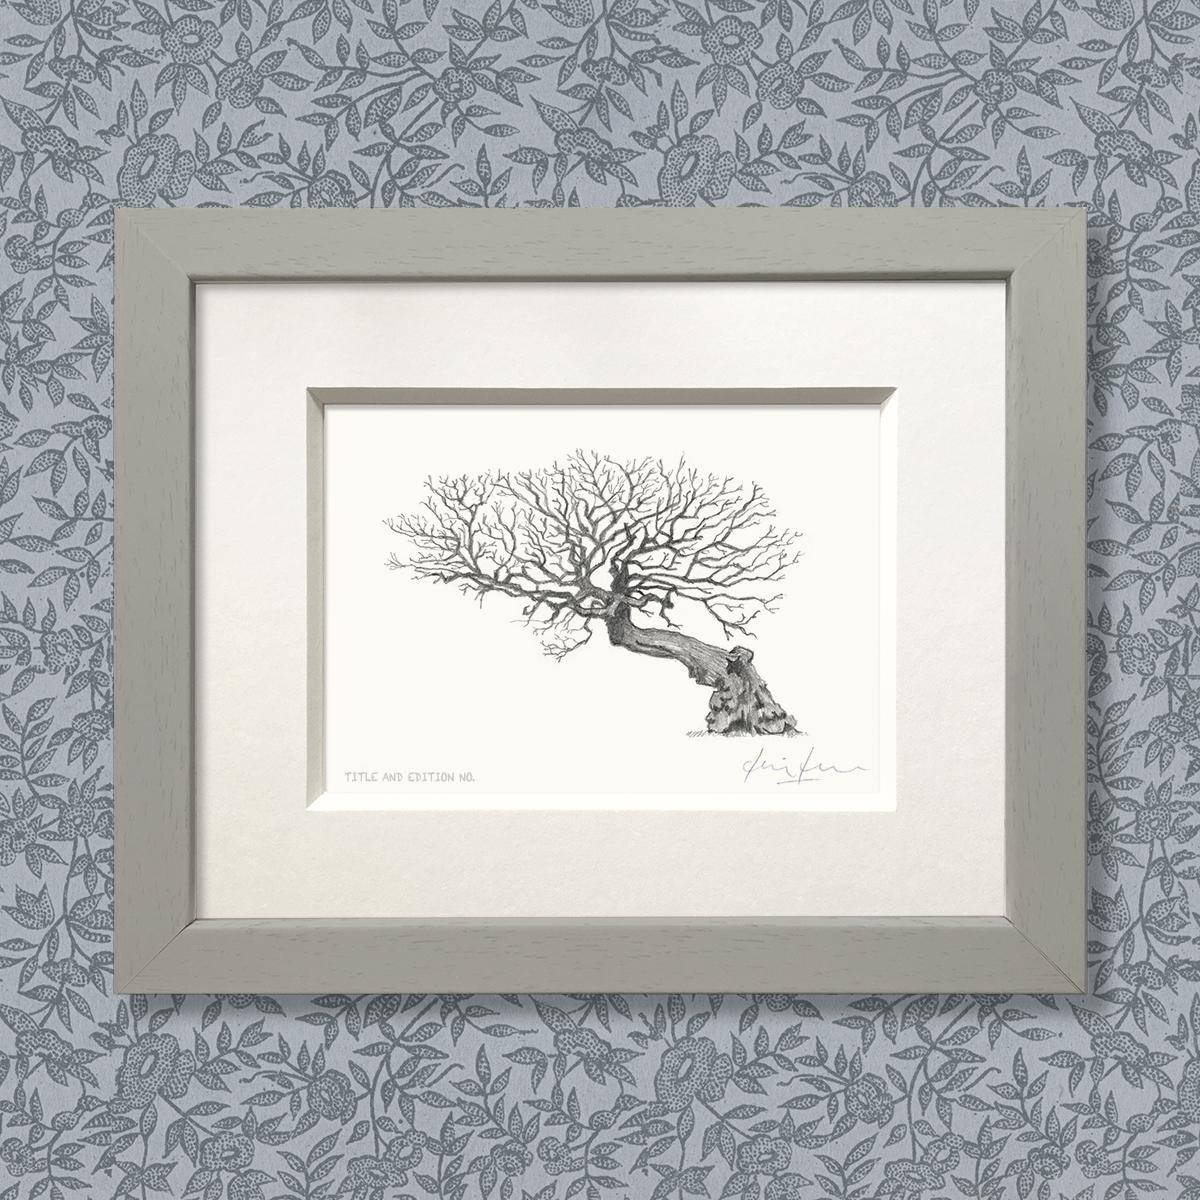 Limited edition print from pencil drawing of an old tree in a grey frame